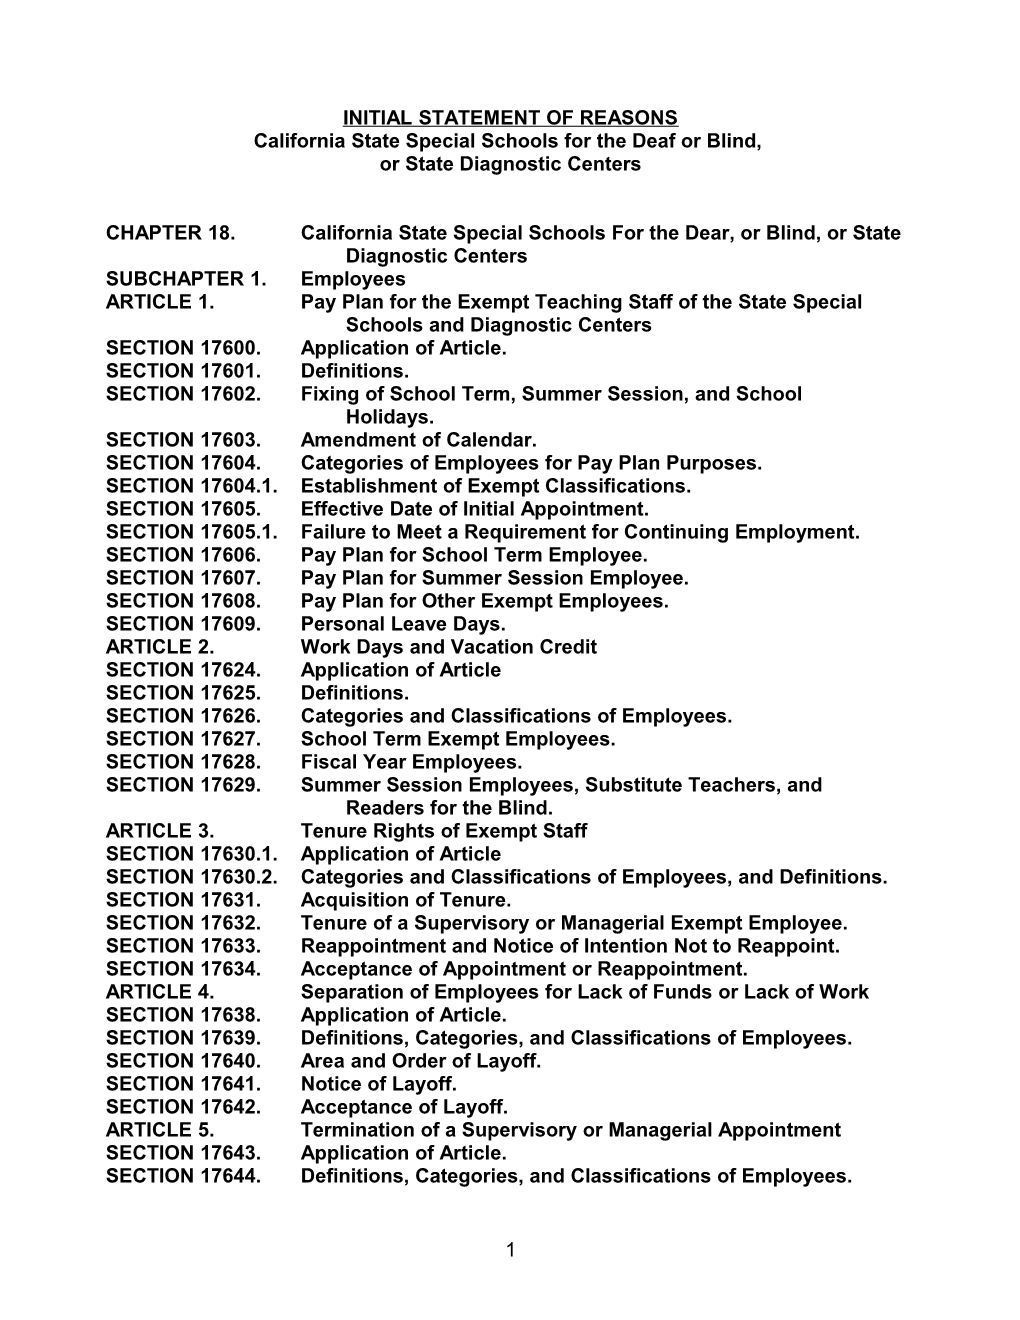 SSS ISOR - Laws and Regulations (CA Dept of Education)